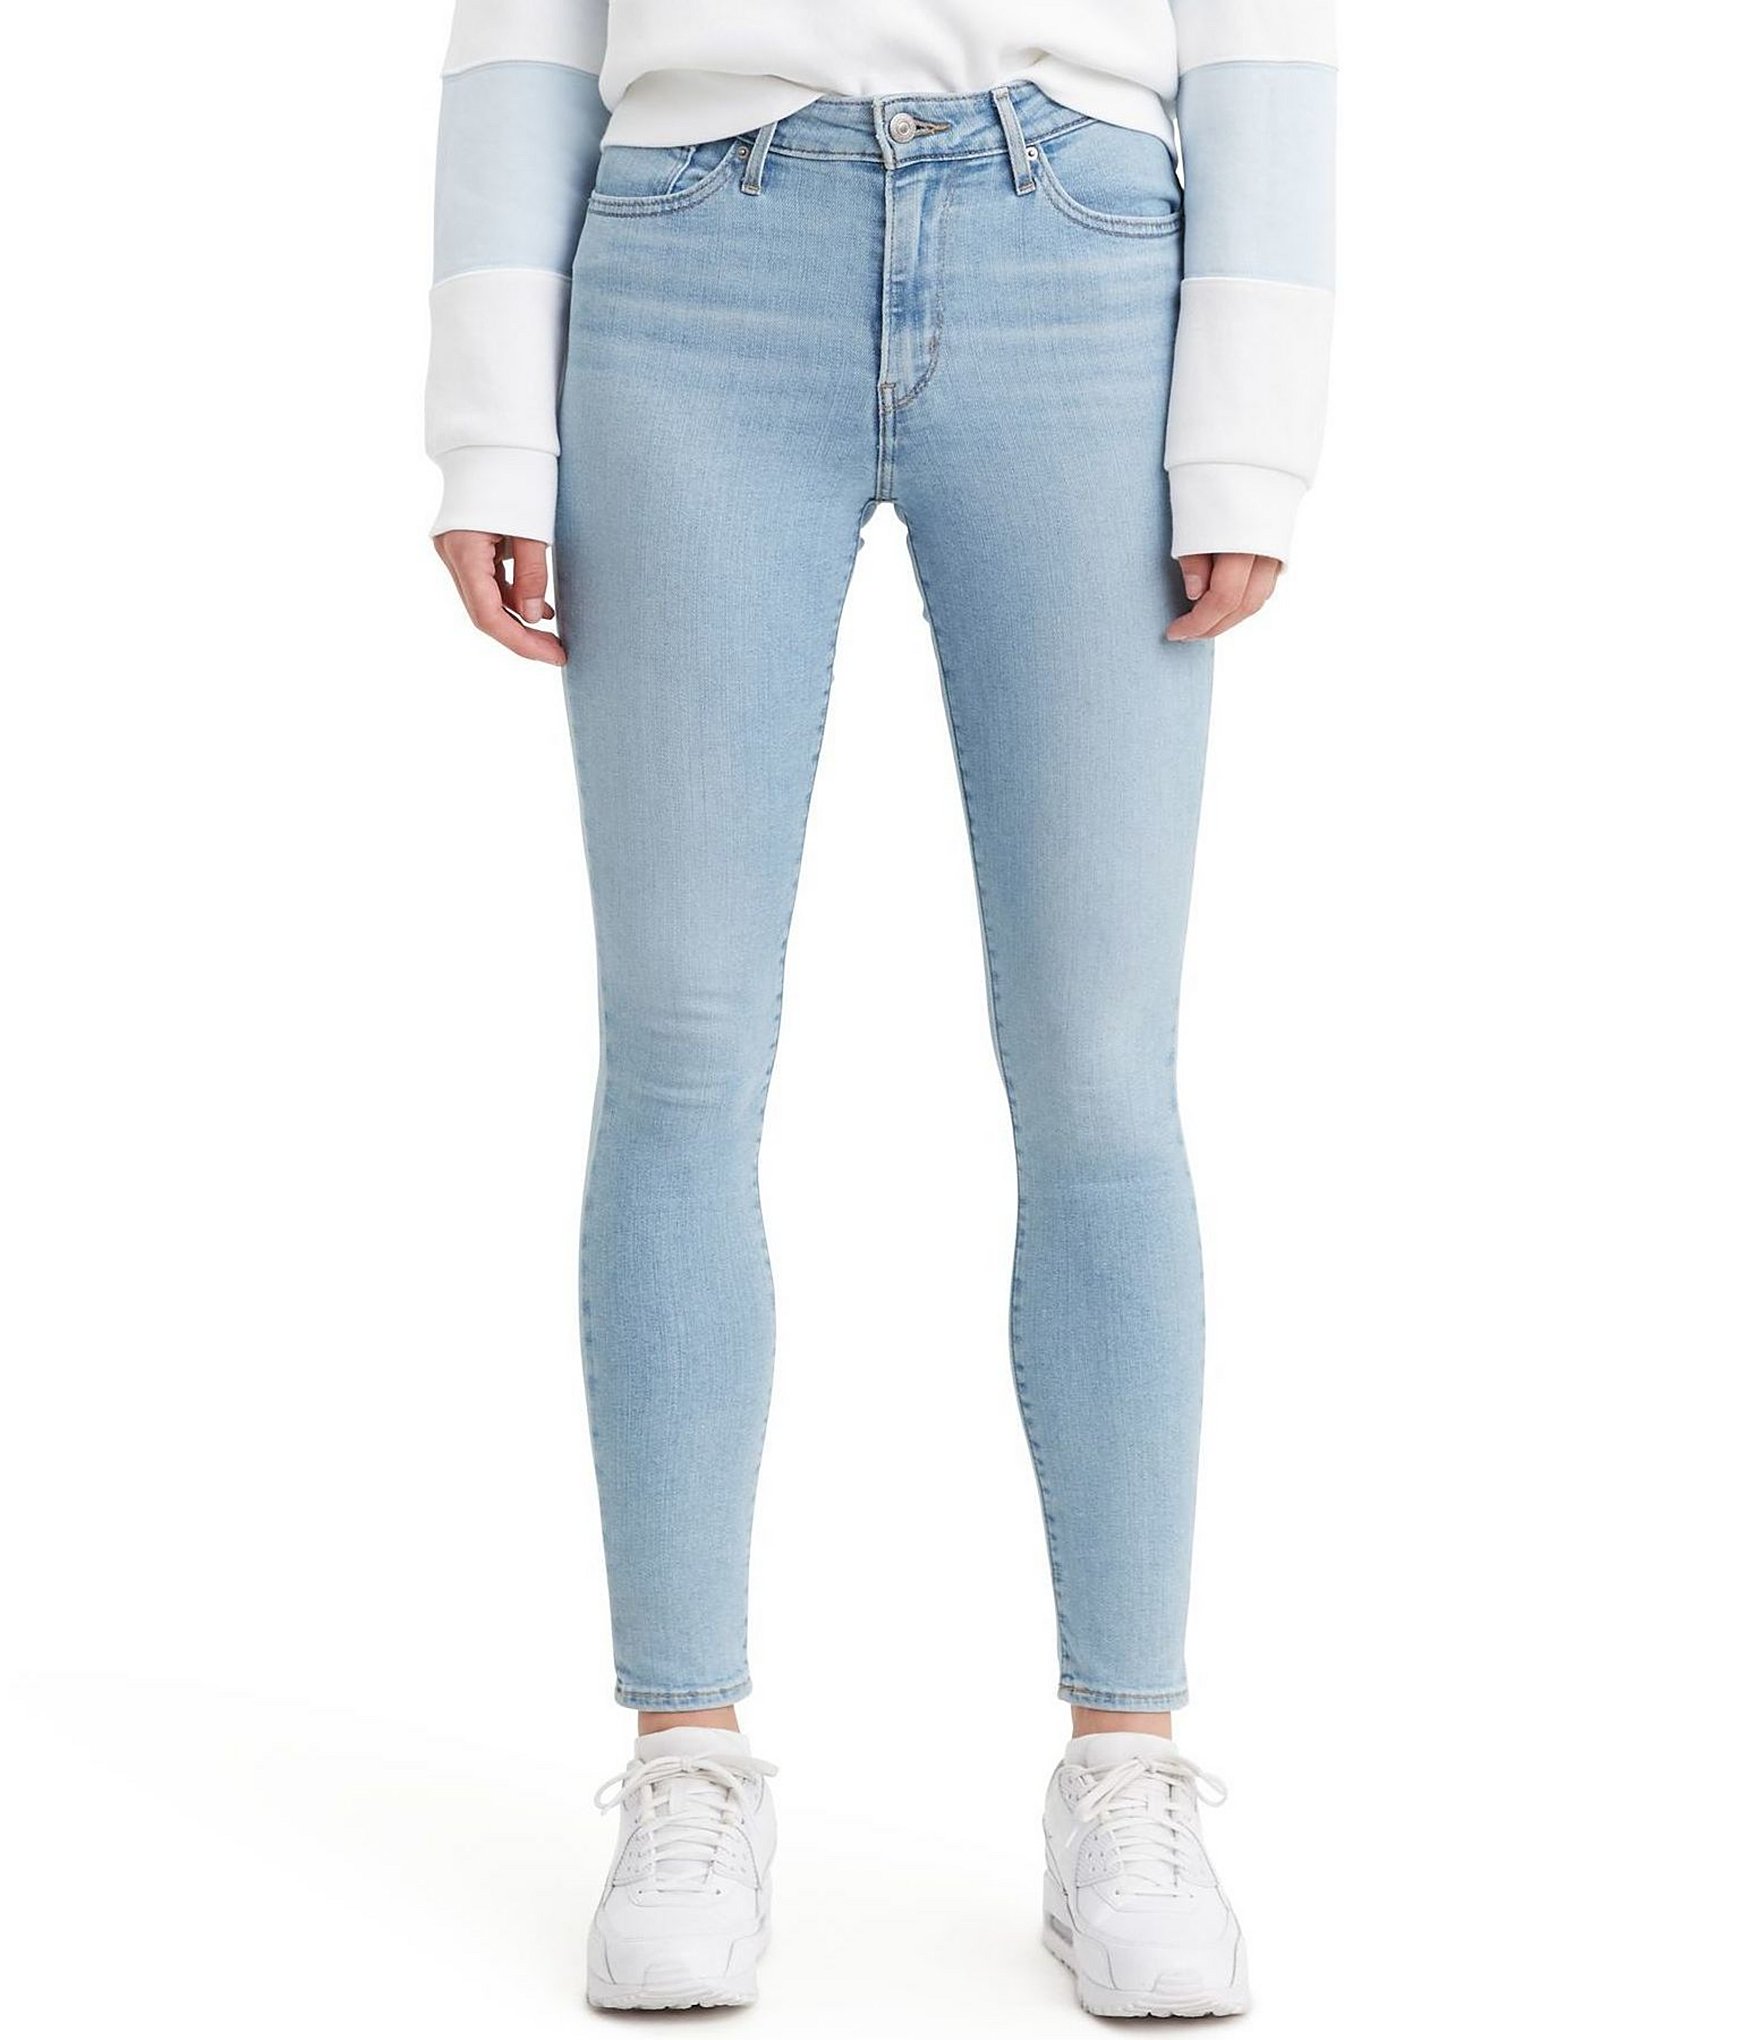 levi's high rise skinny jeans